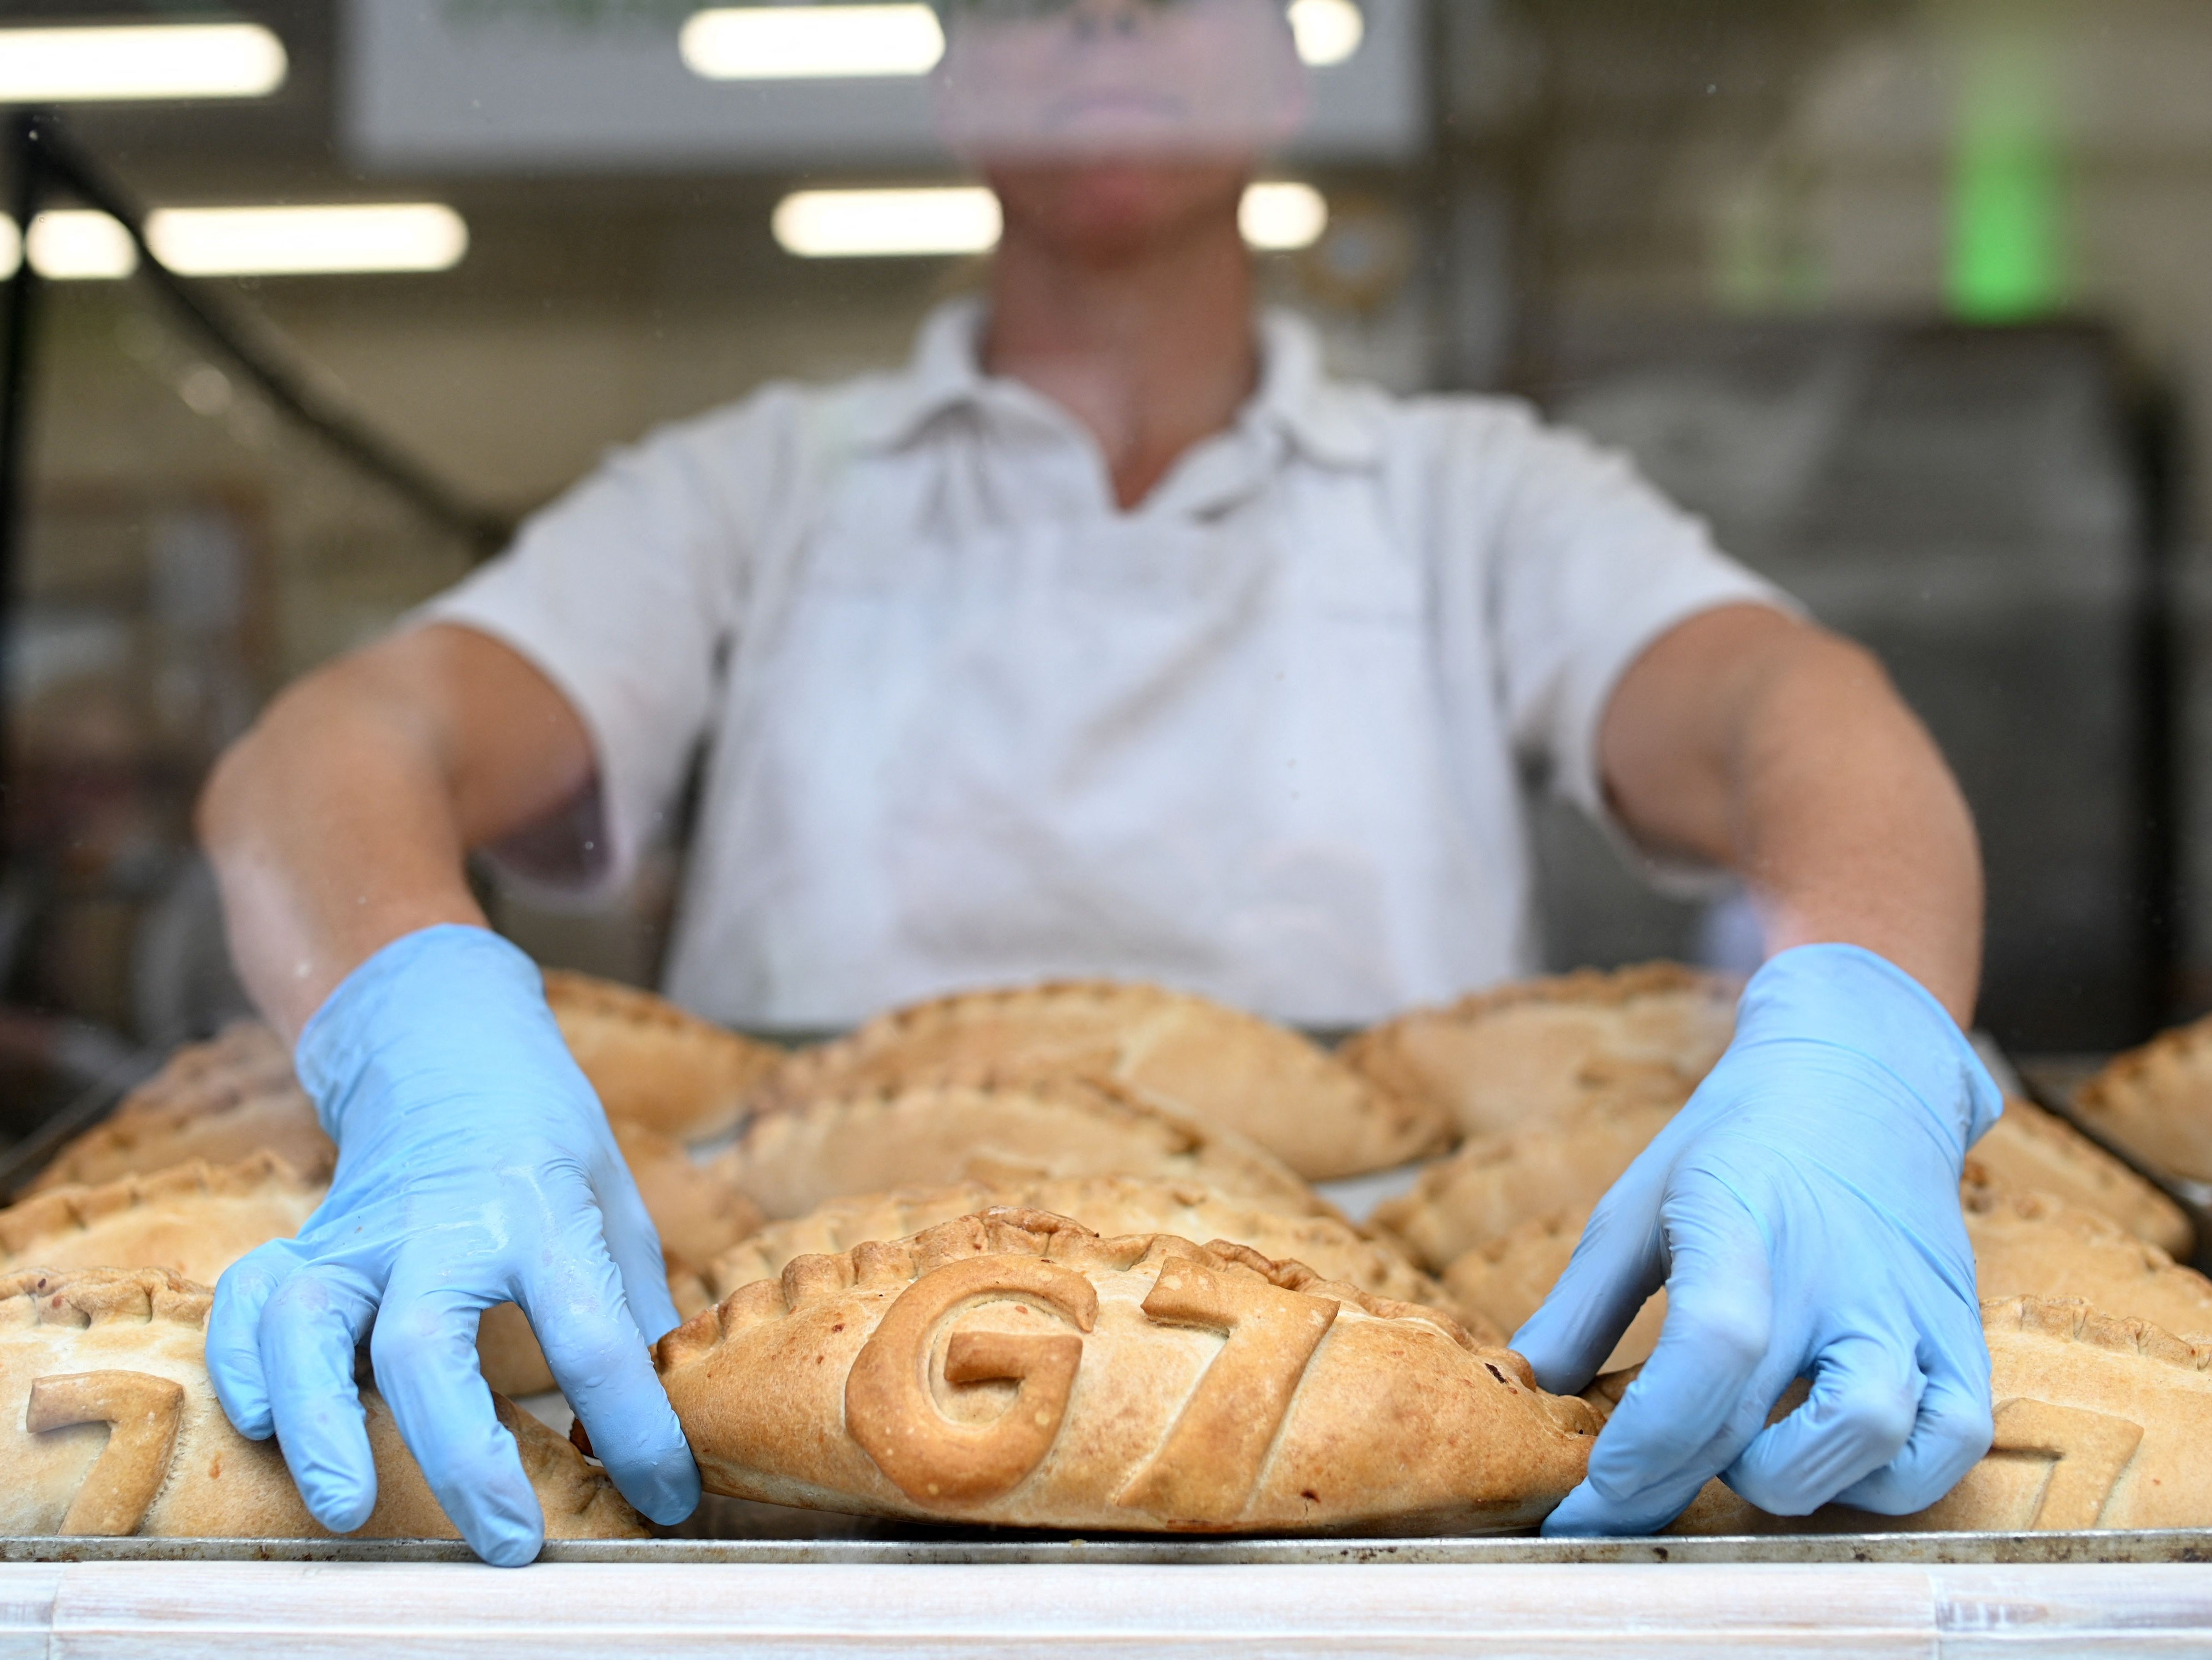 Freshly baked G7 Cornish pasties are placed in the window of a pastry shop in St Ives, Cornwall